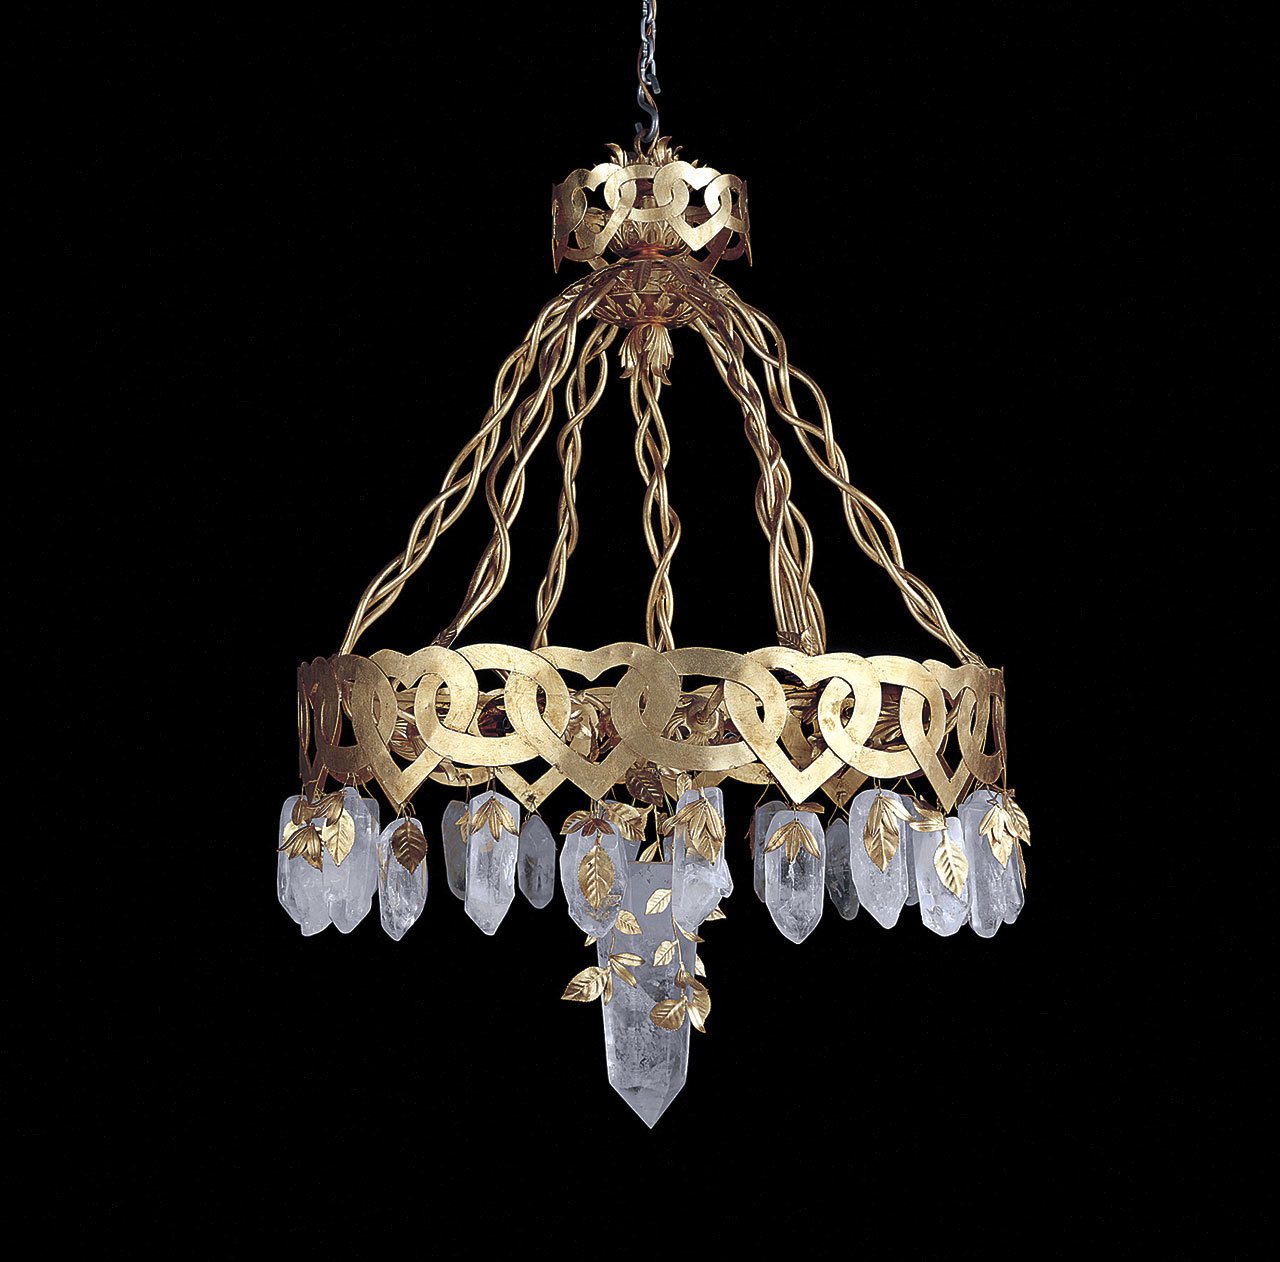 Famous Coco Chanel chandelier a high value item | HeraldNet.com